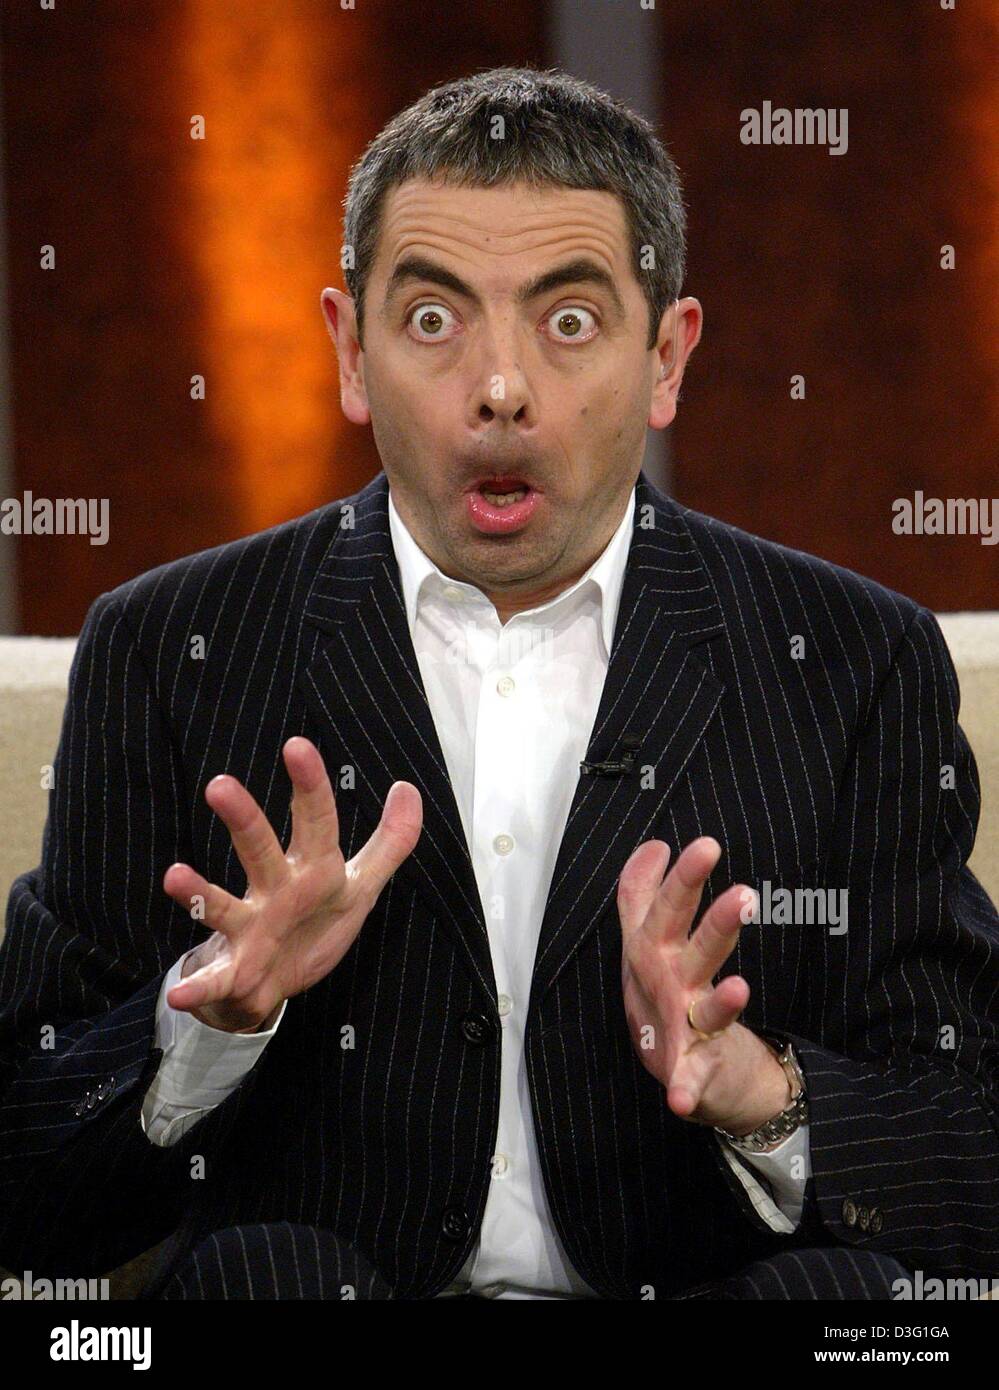 (dpa) - British comedian Rowan Atkinson alias 'Mr Bean' pulls a face during the popular TV show 'Wetten dass...?' (bet that...?), in Lucerne, Switzerland, 22 March 2003. The live show broadcast by the German TV station ZDF was watched by 13.8 million people, although it was subject to be cancelled at the last minute due to the war in Iraq. Stock Photo